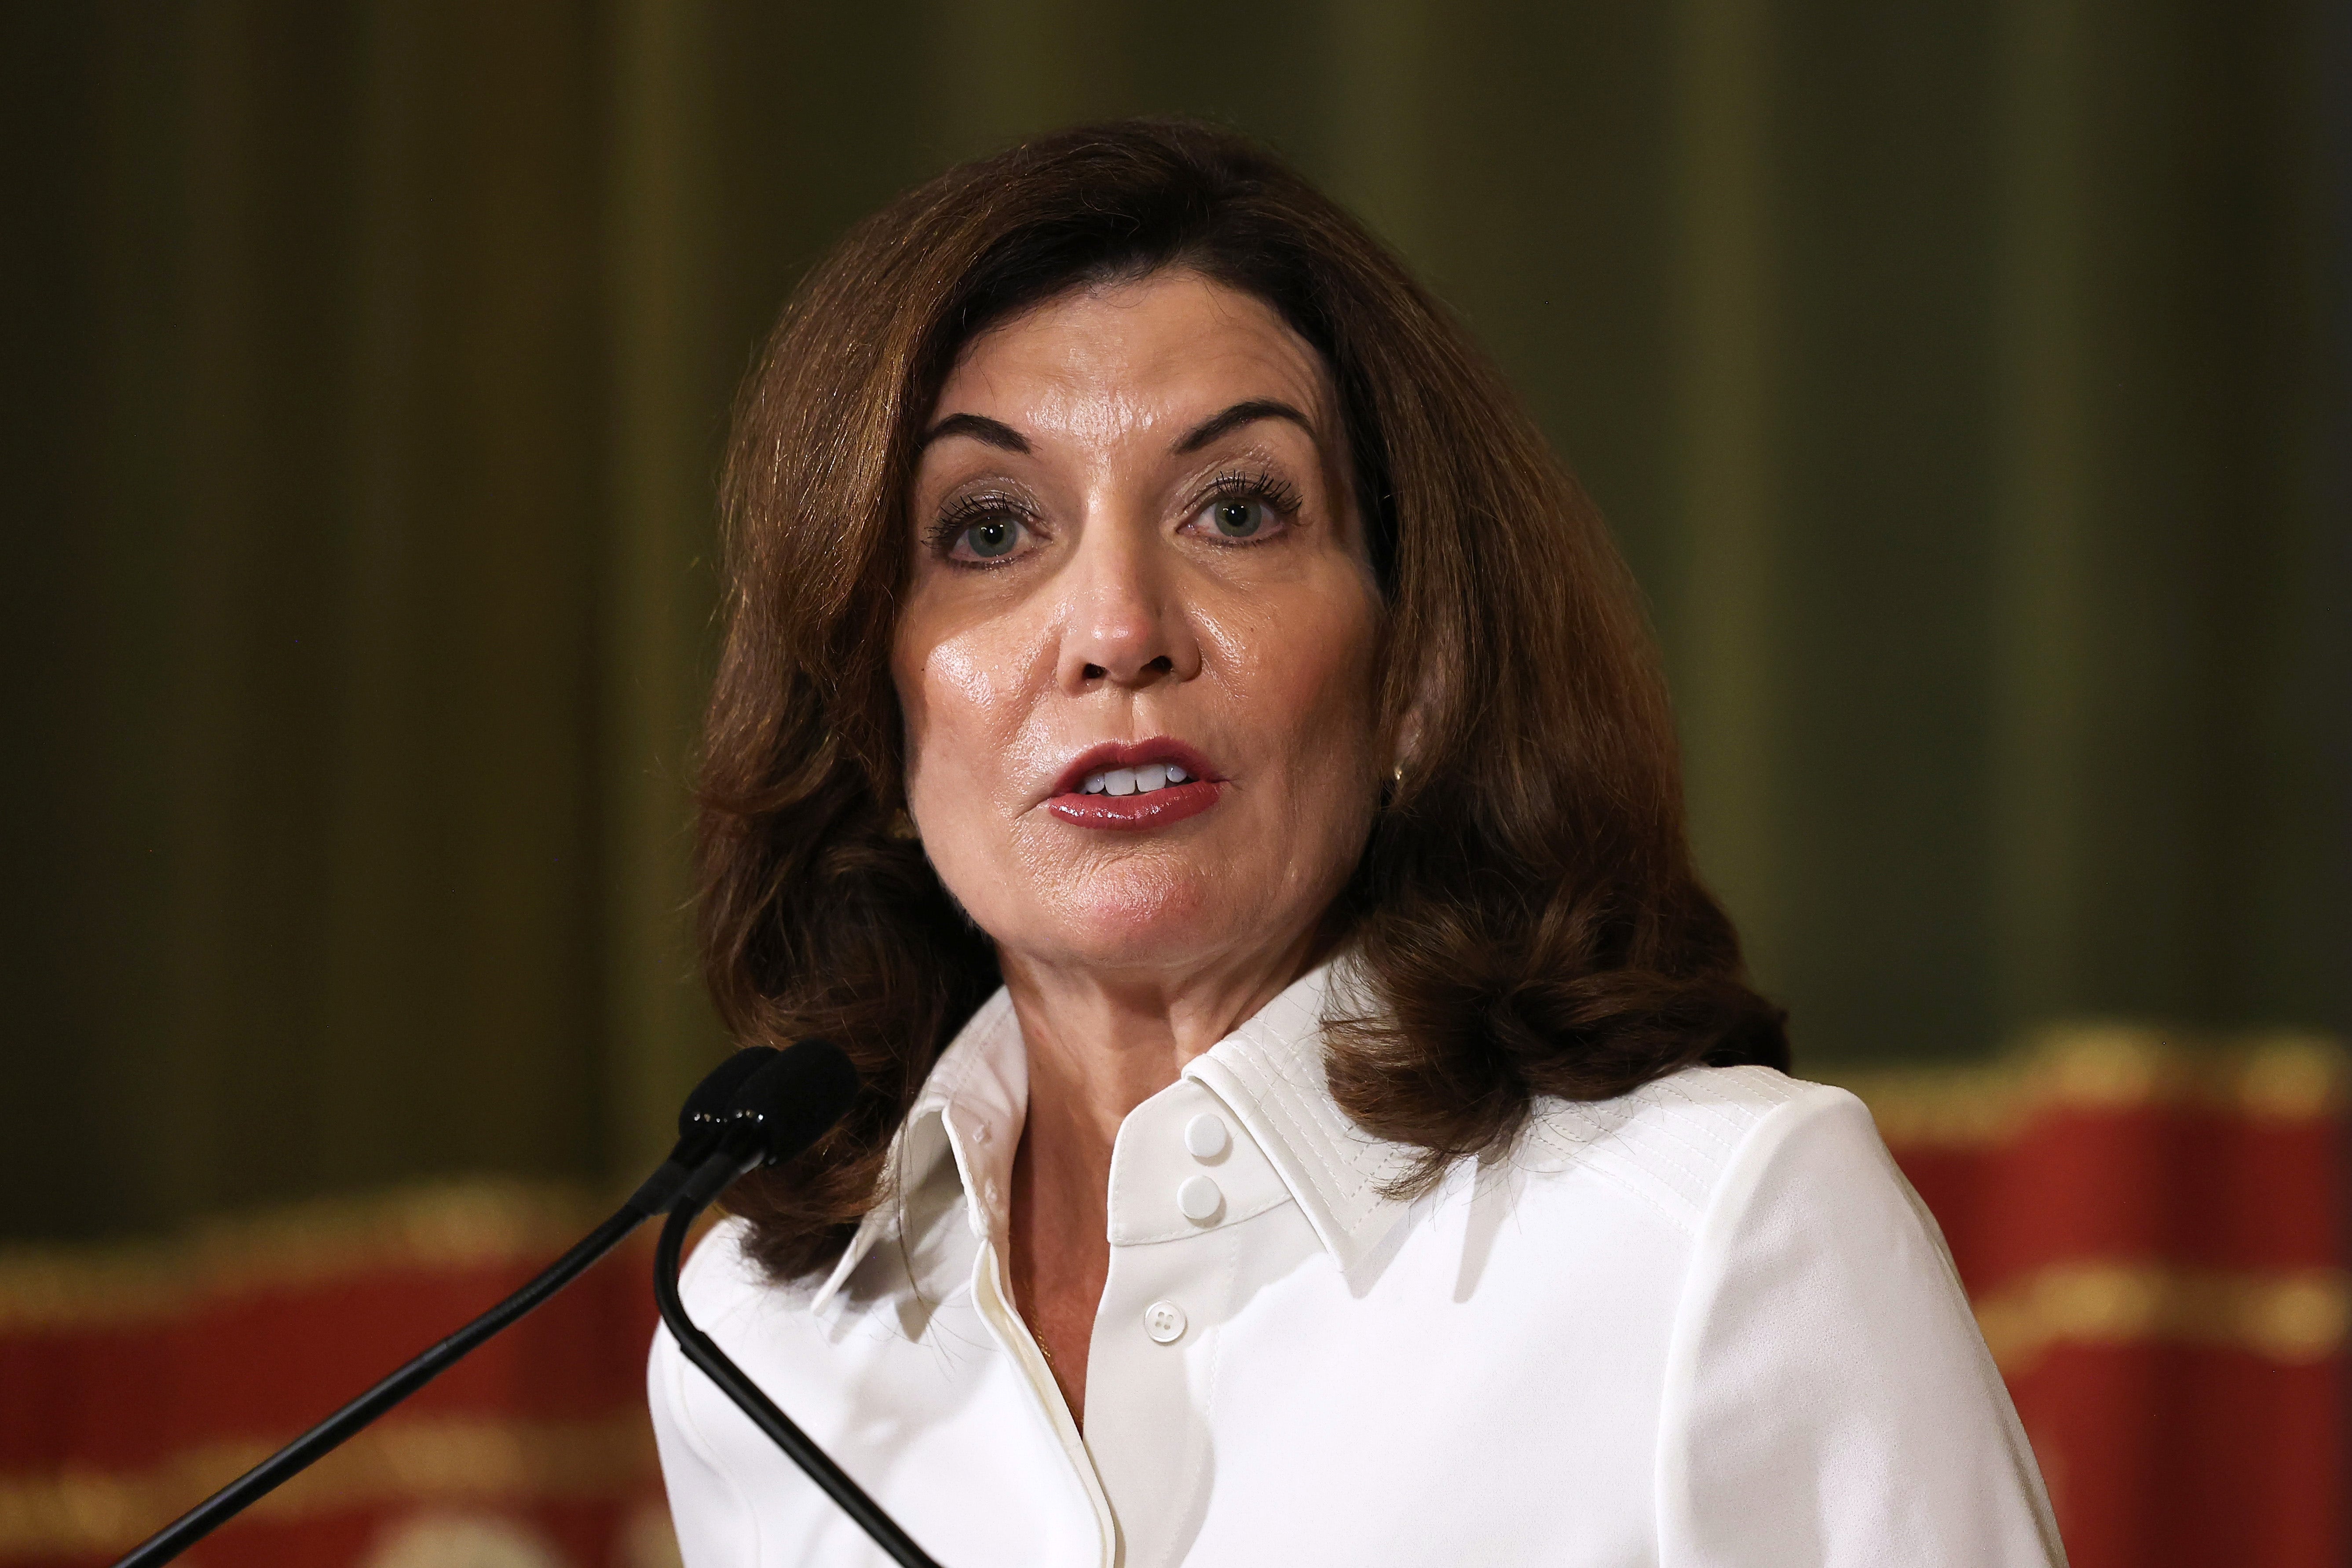 New York Gov. Kathy Hochul speaks after taking her ceremonial oath of office at the New York State Capitol on Aug. 24, 2021 in Albany, N.Y.